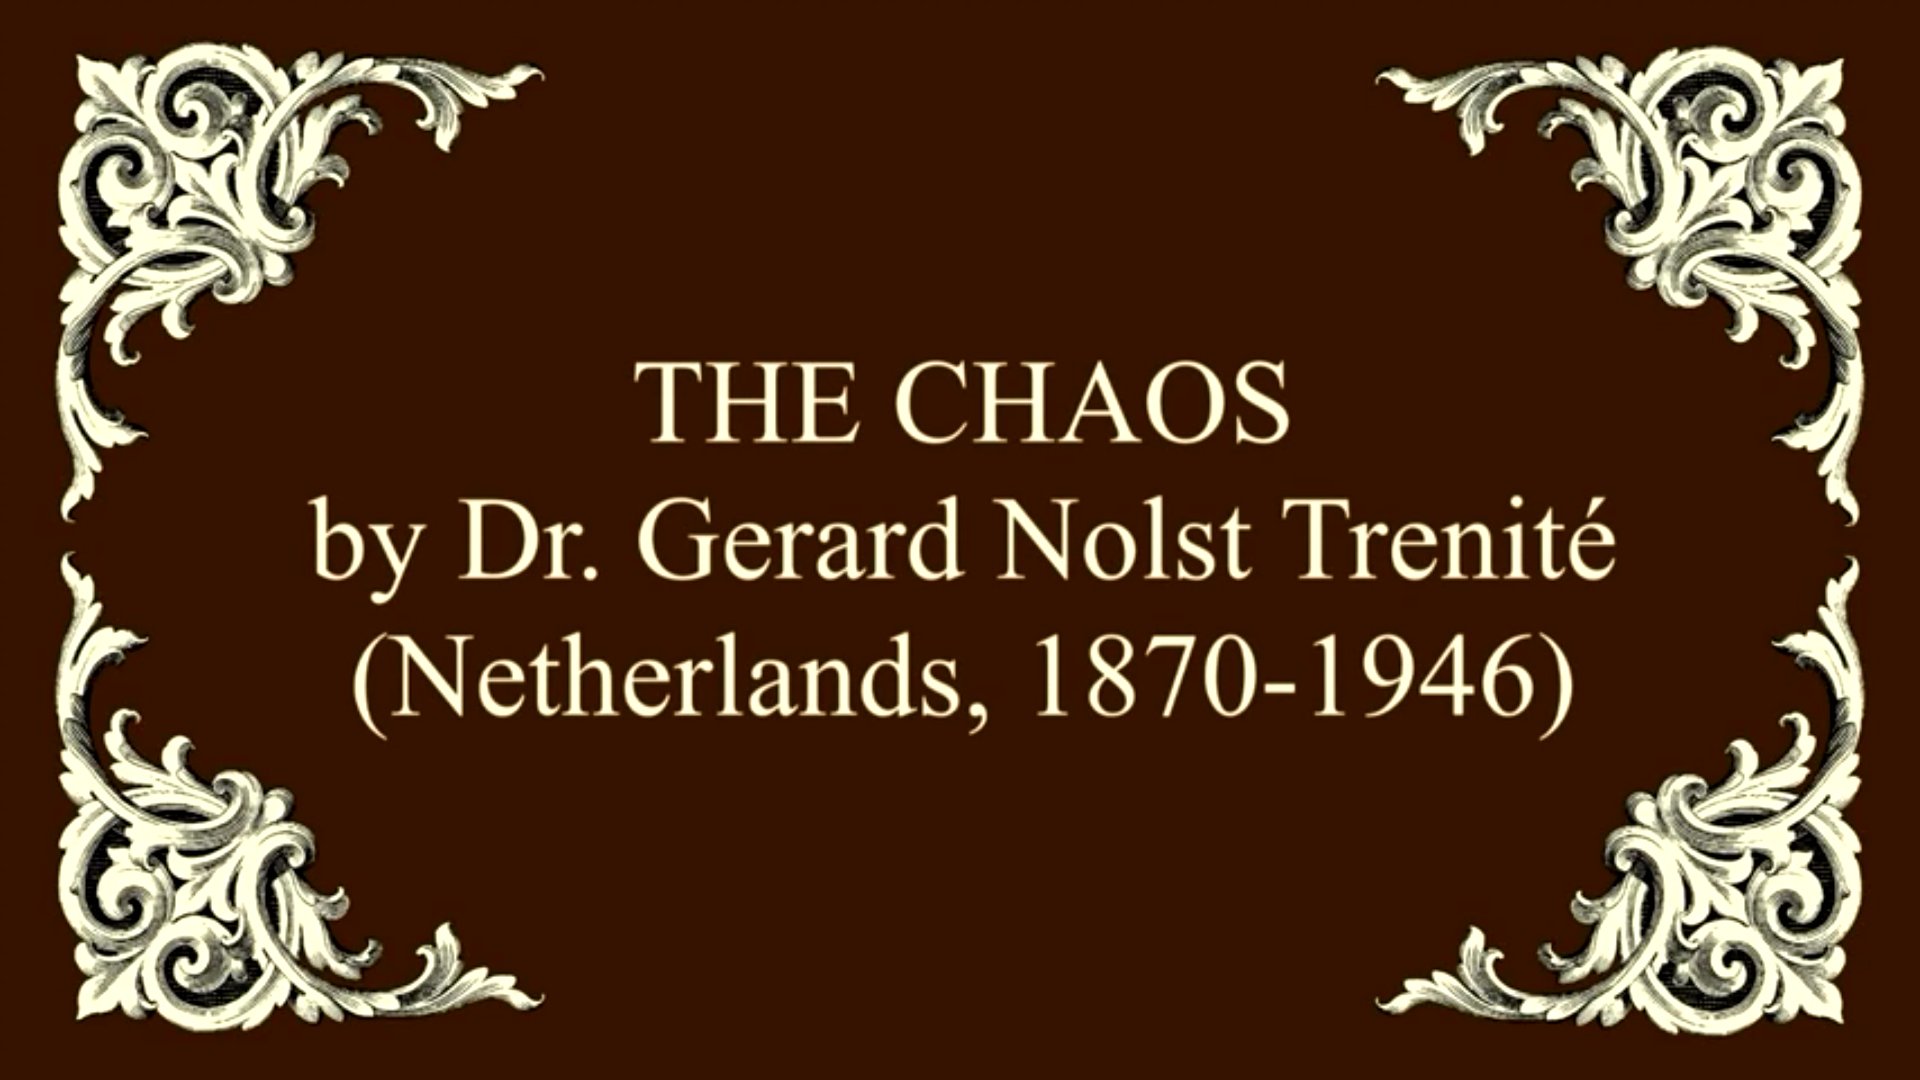 The Chaos